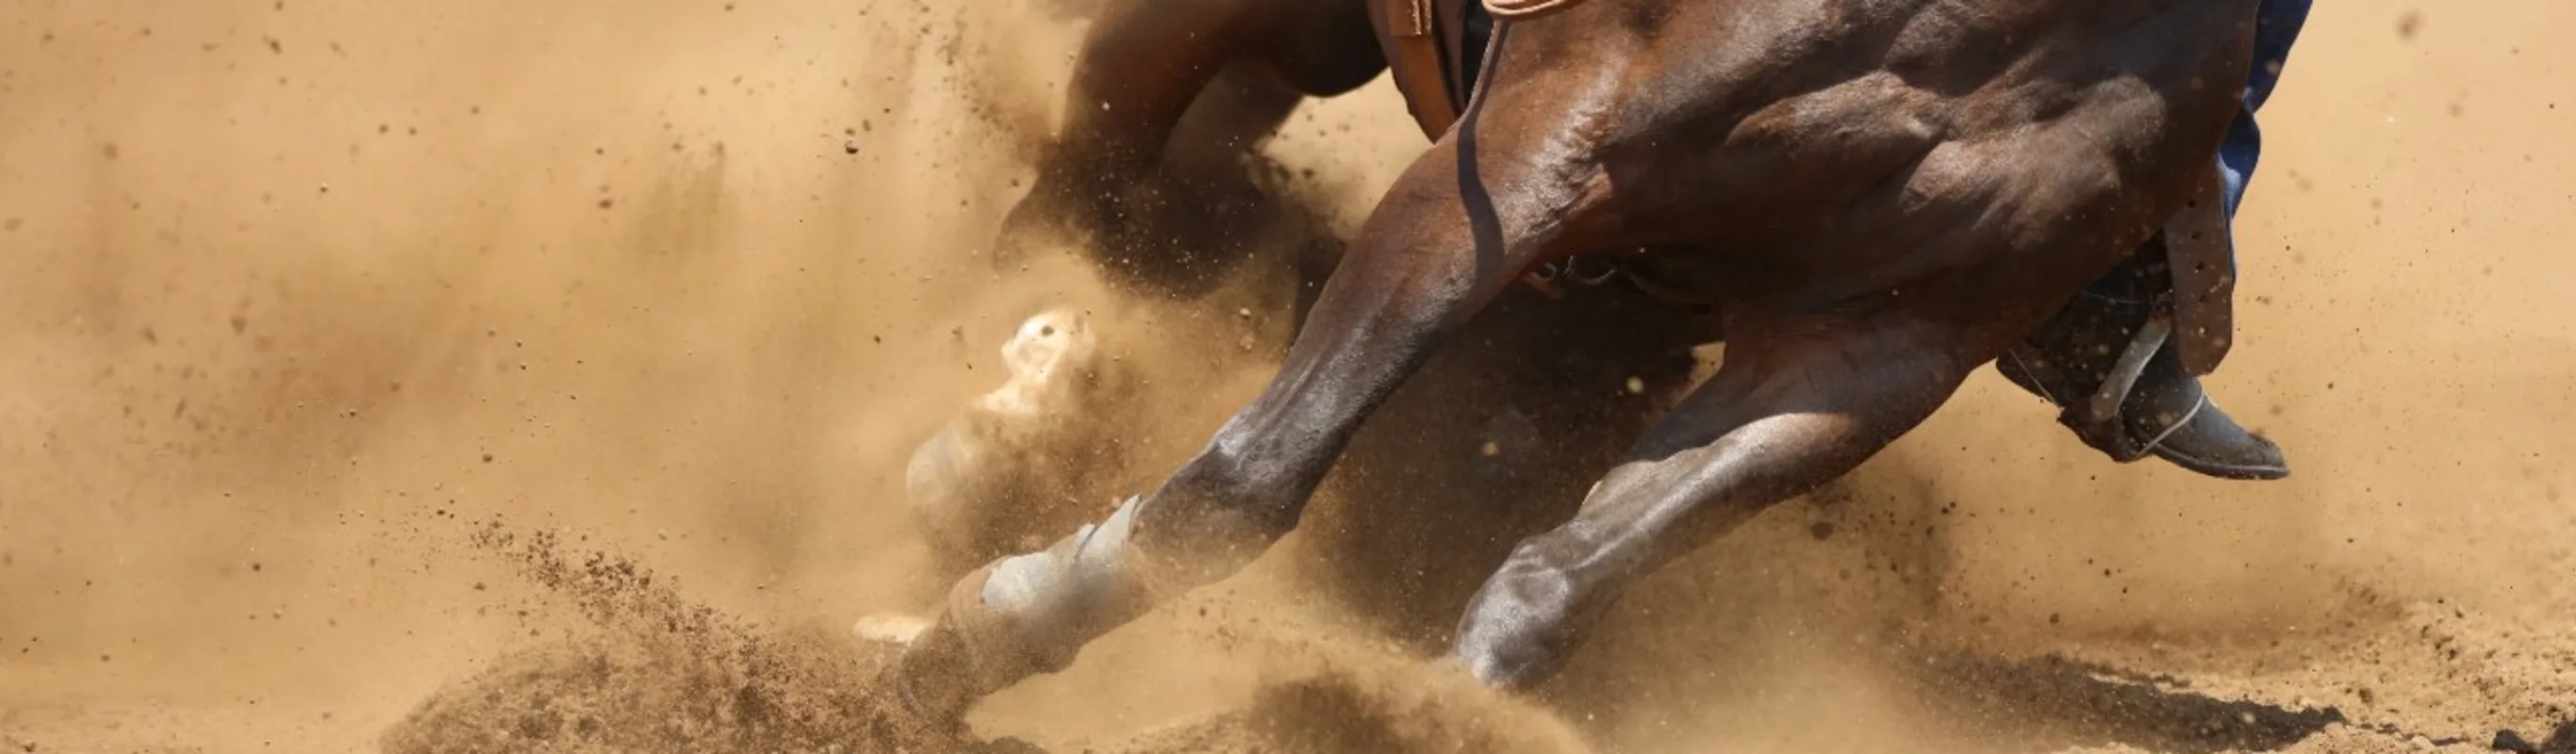 A horse running and kicking up the dirt